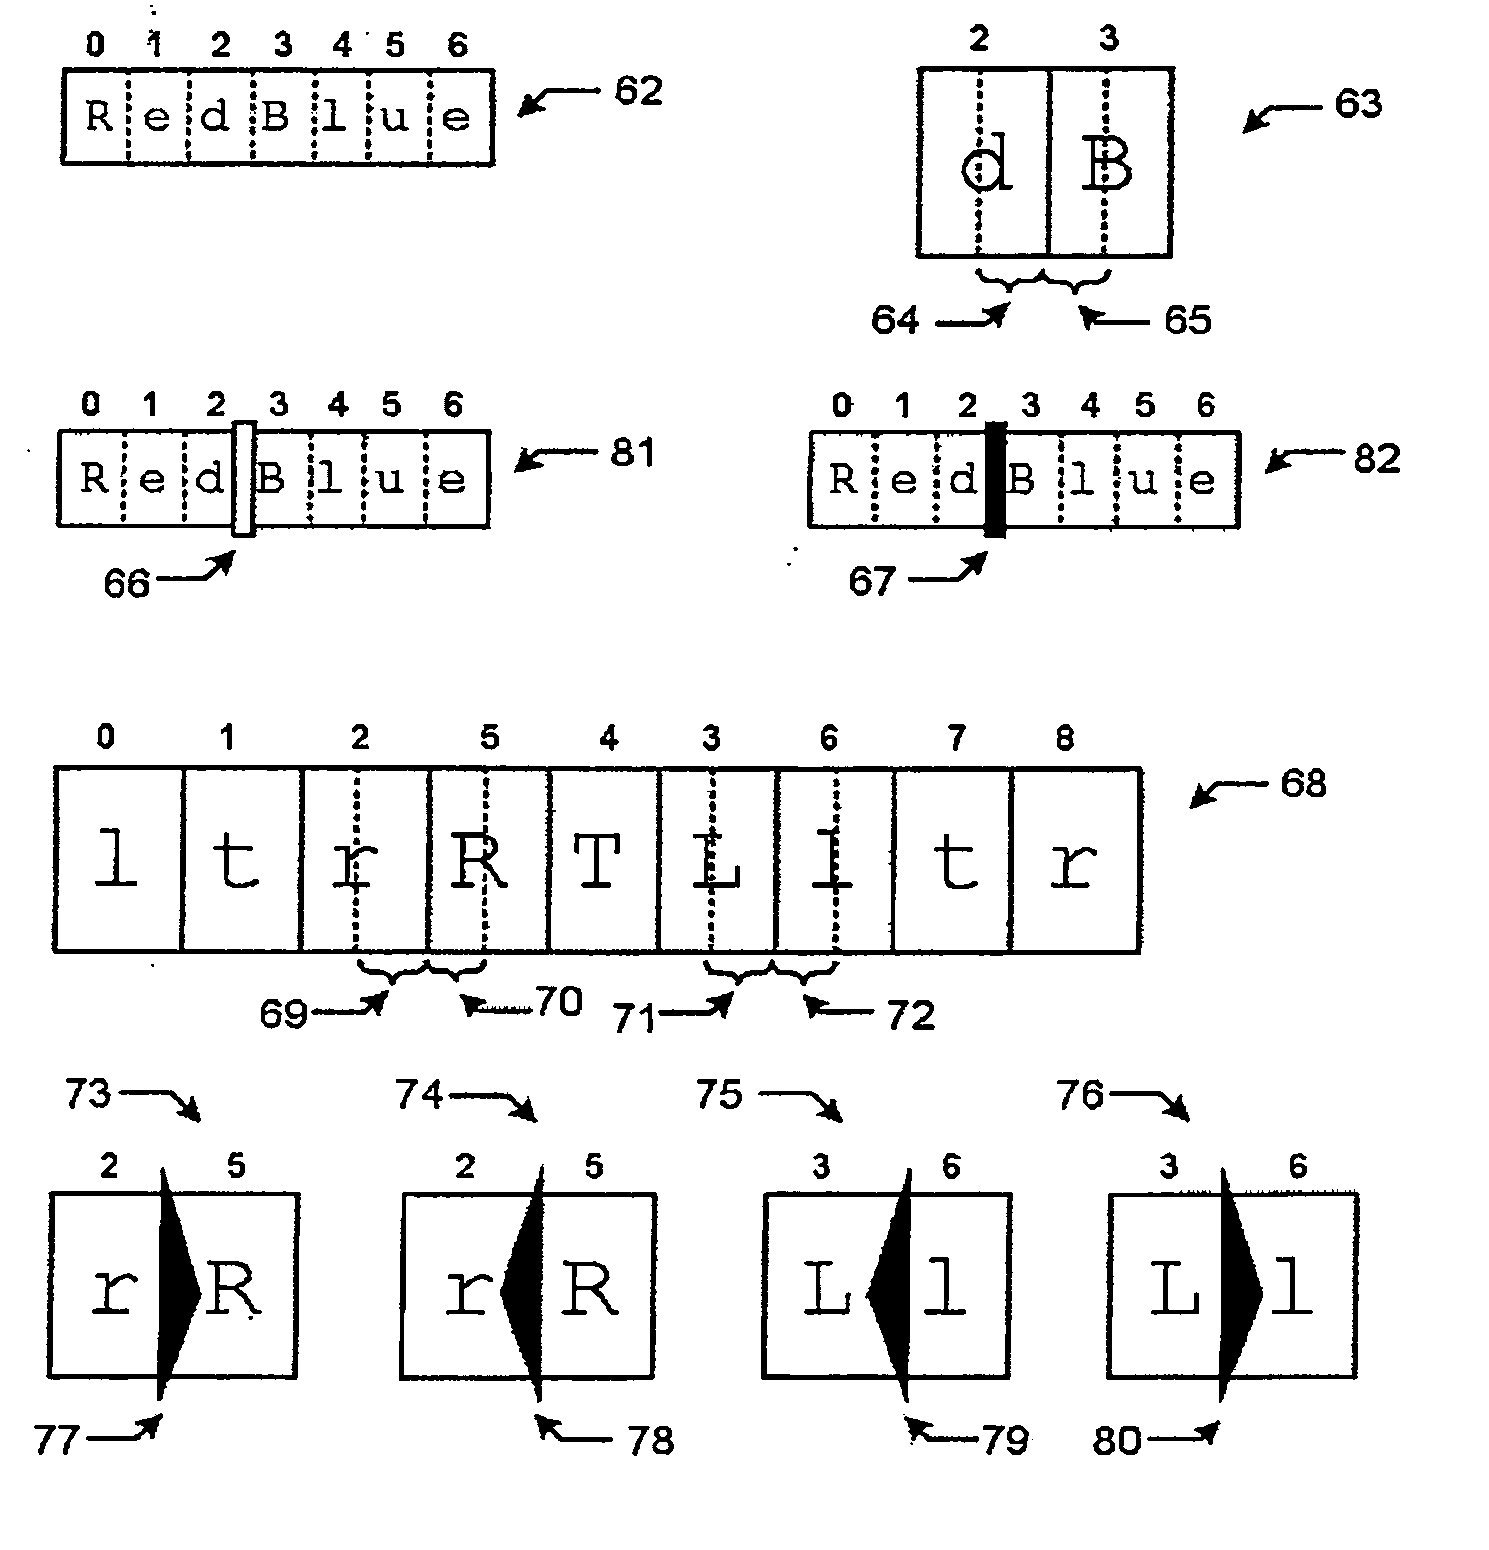 Method and apparatus for layout of text and image documents